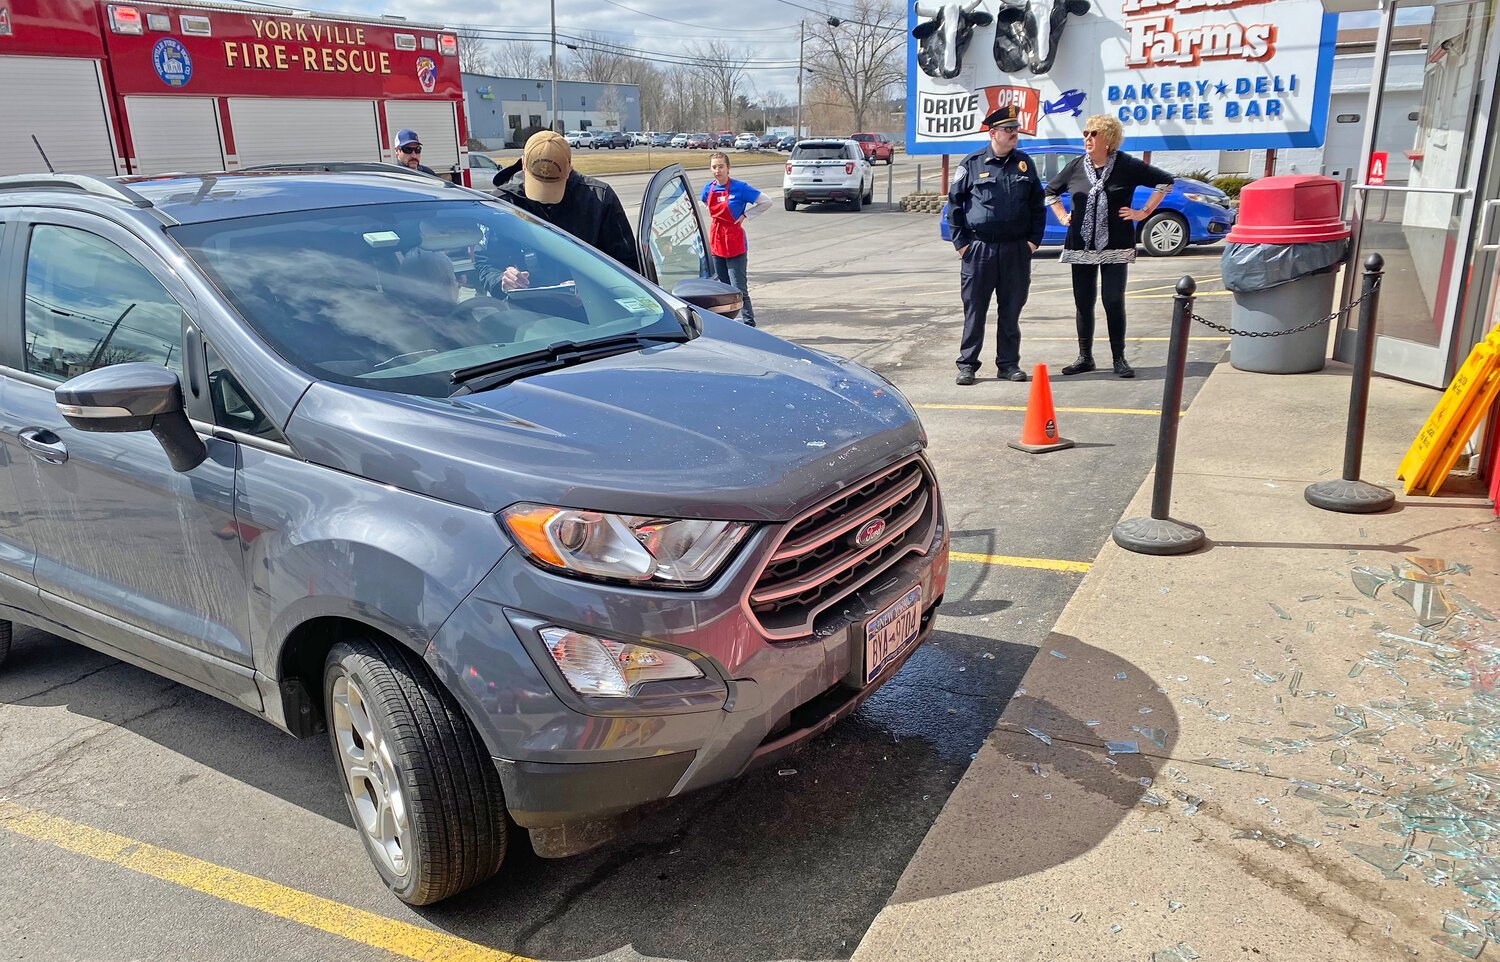 Yorkville Police investigate after the driver of this SUV crashed into the front of Holland Farms Bakery &amp; Deli on Oriskany Boulevard in Yorkville Friday afternoon.